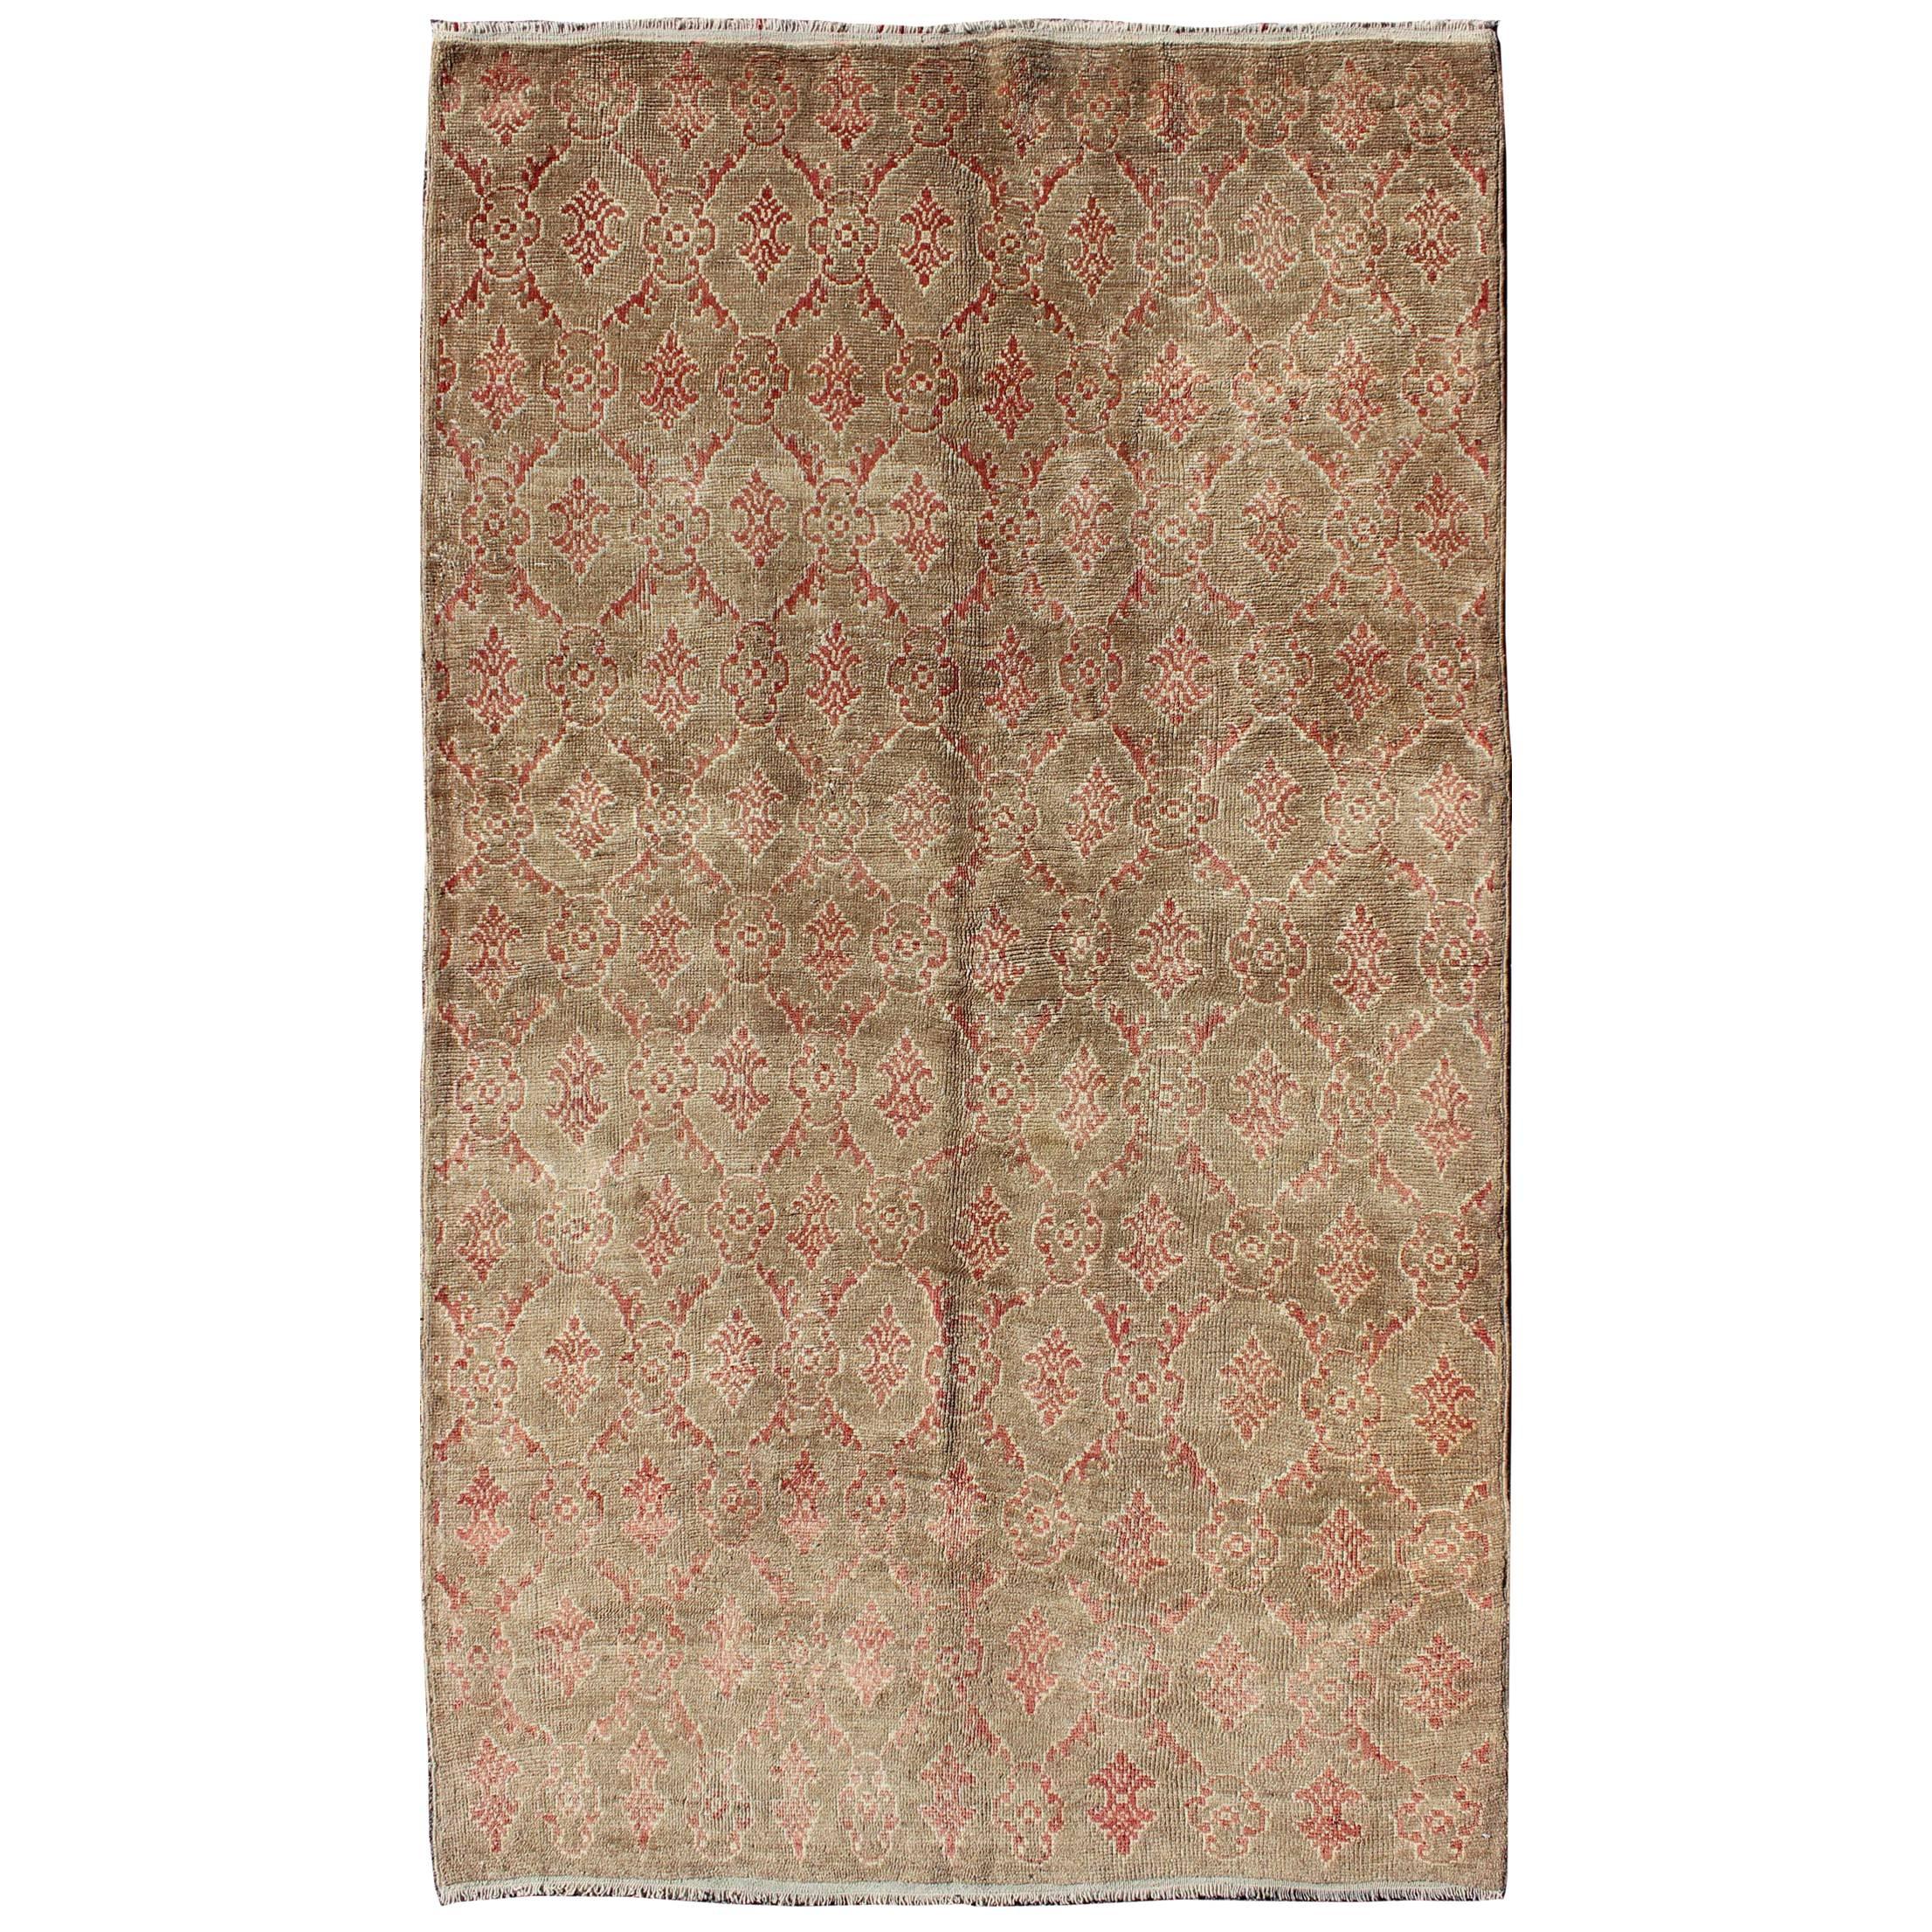 Turkish Tulu Rug with All-Over Repeating Design in Light Green, Red and Cream